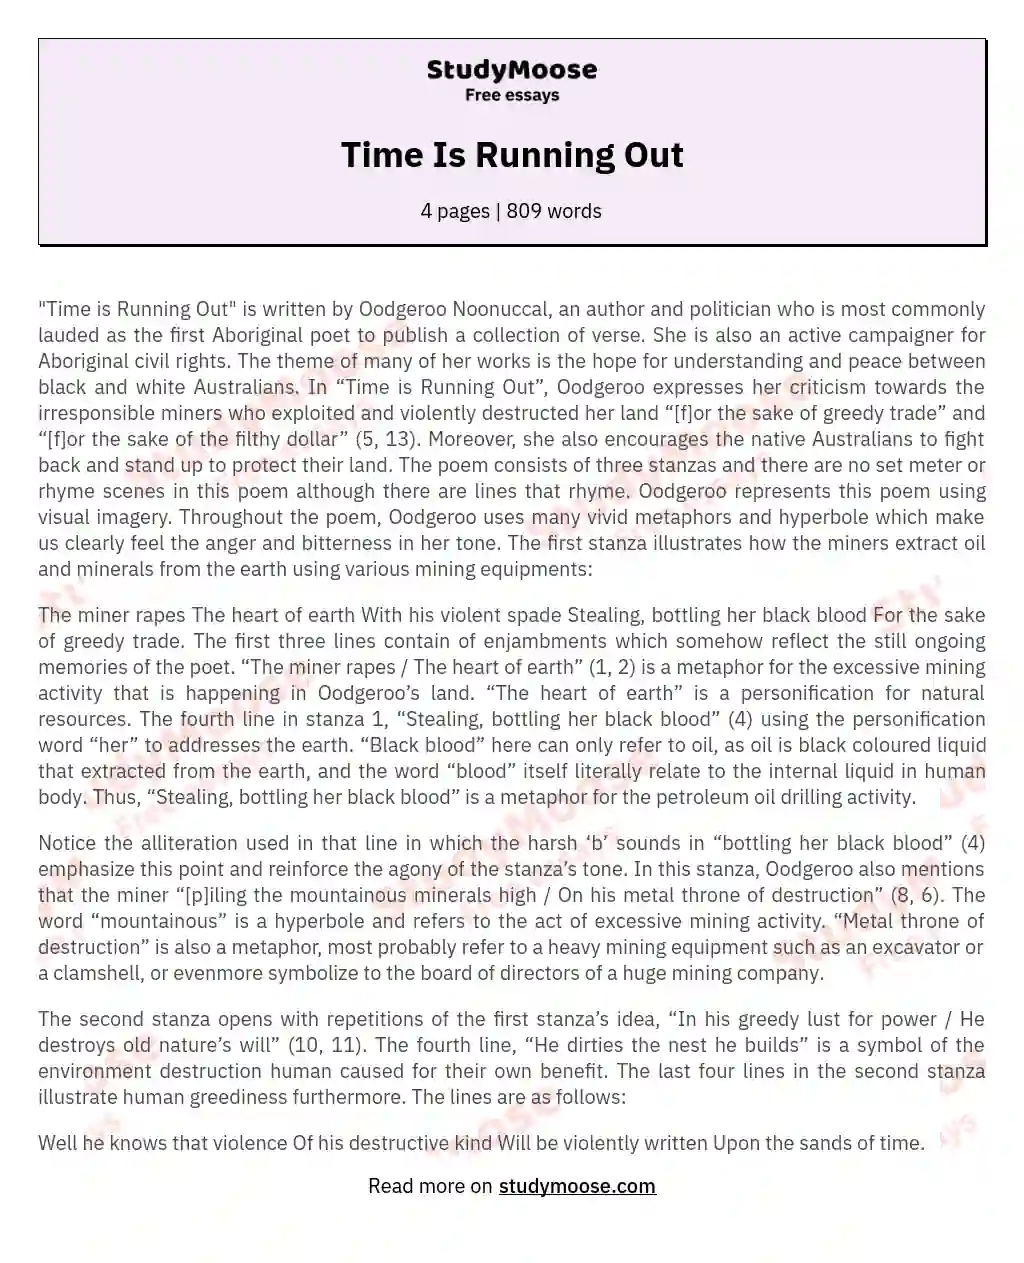 Time Is Running Out essay